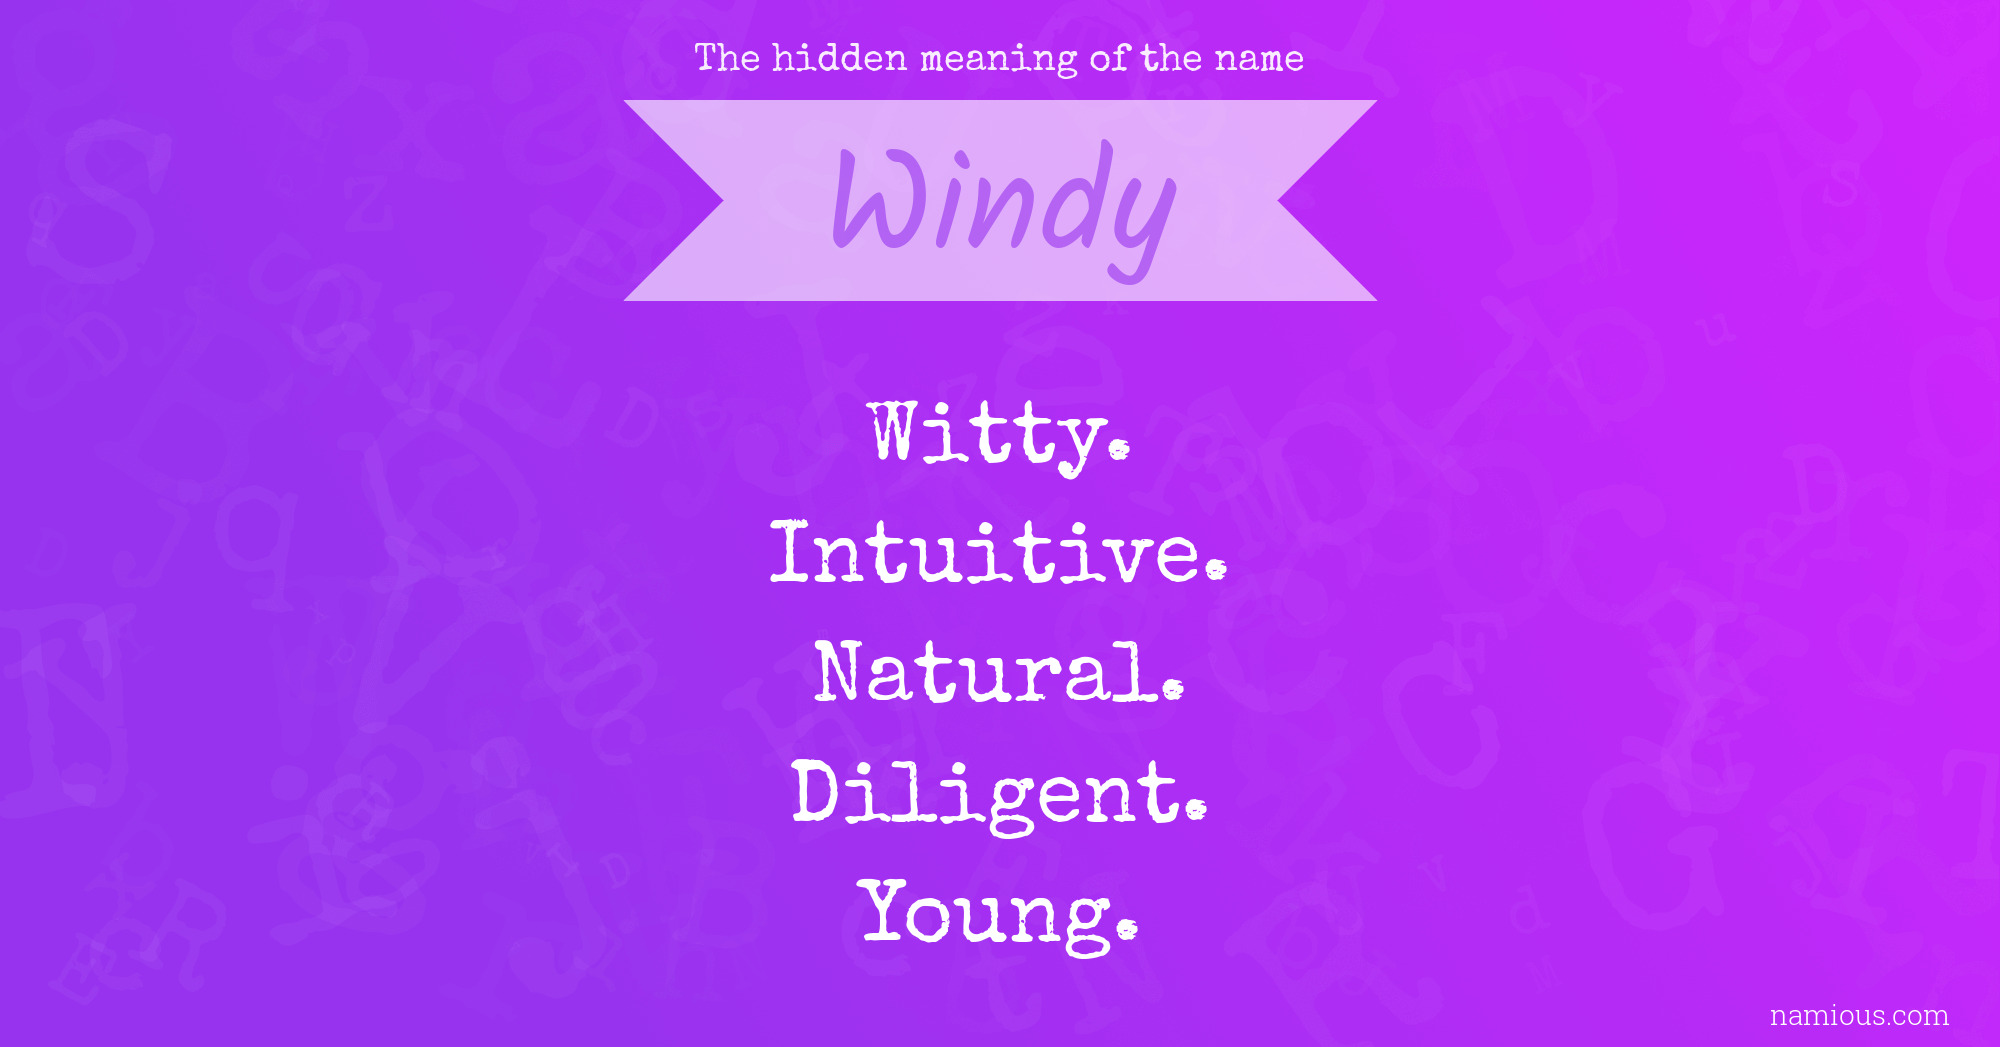 The hidden meaning of the name Windy